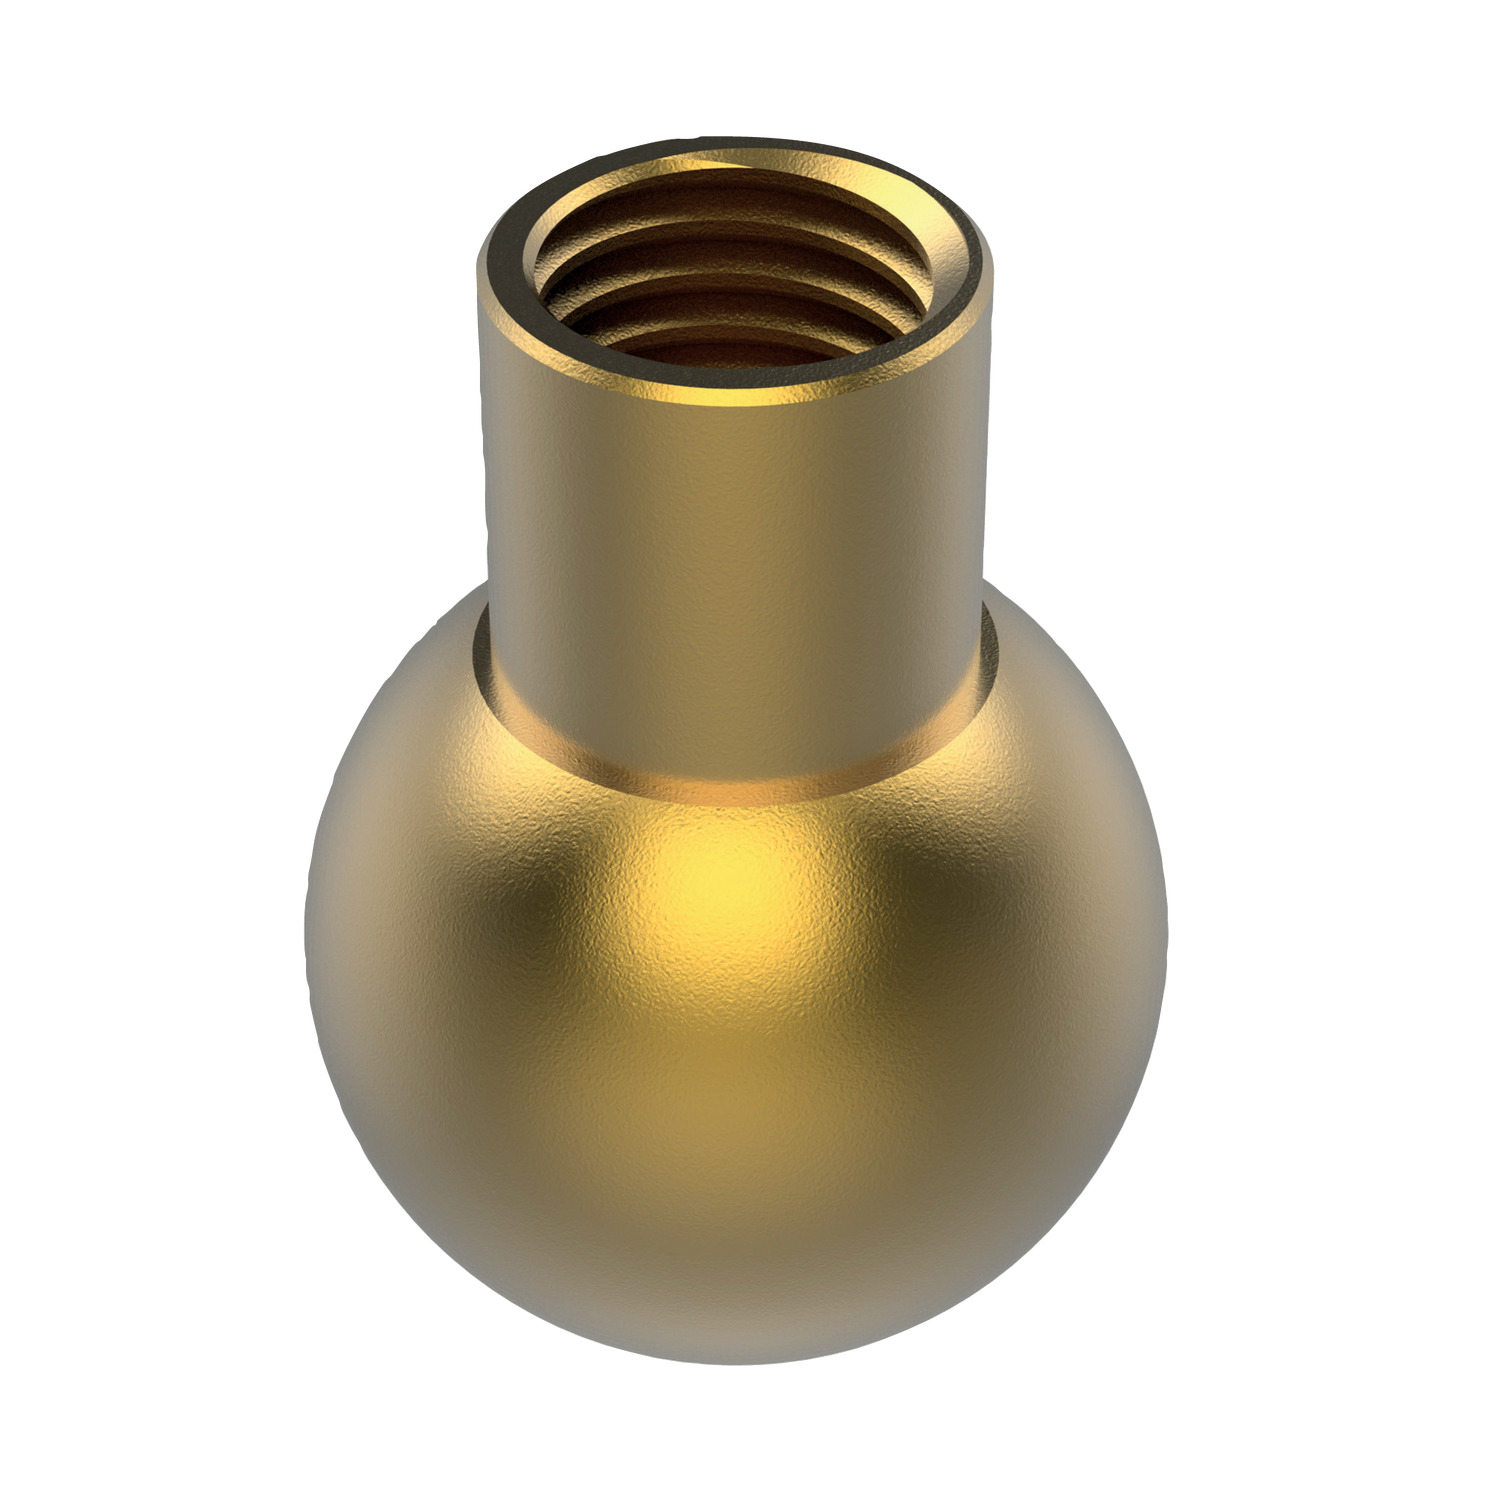 Product 20072, Coolant Nozzles - Brass Ball threaded - max. 33 bar / 